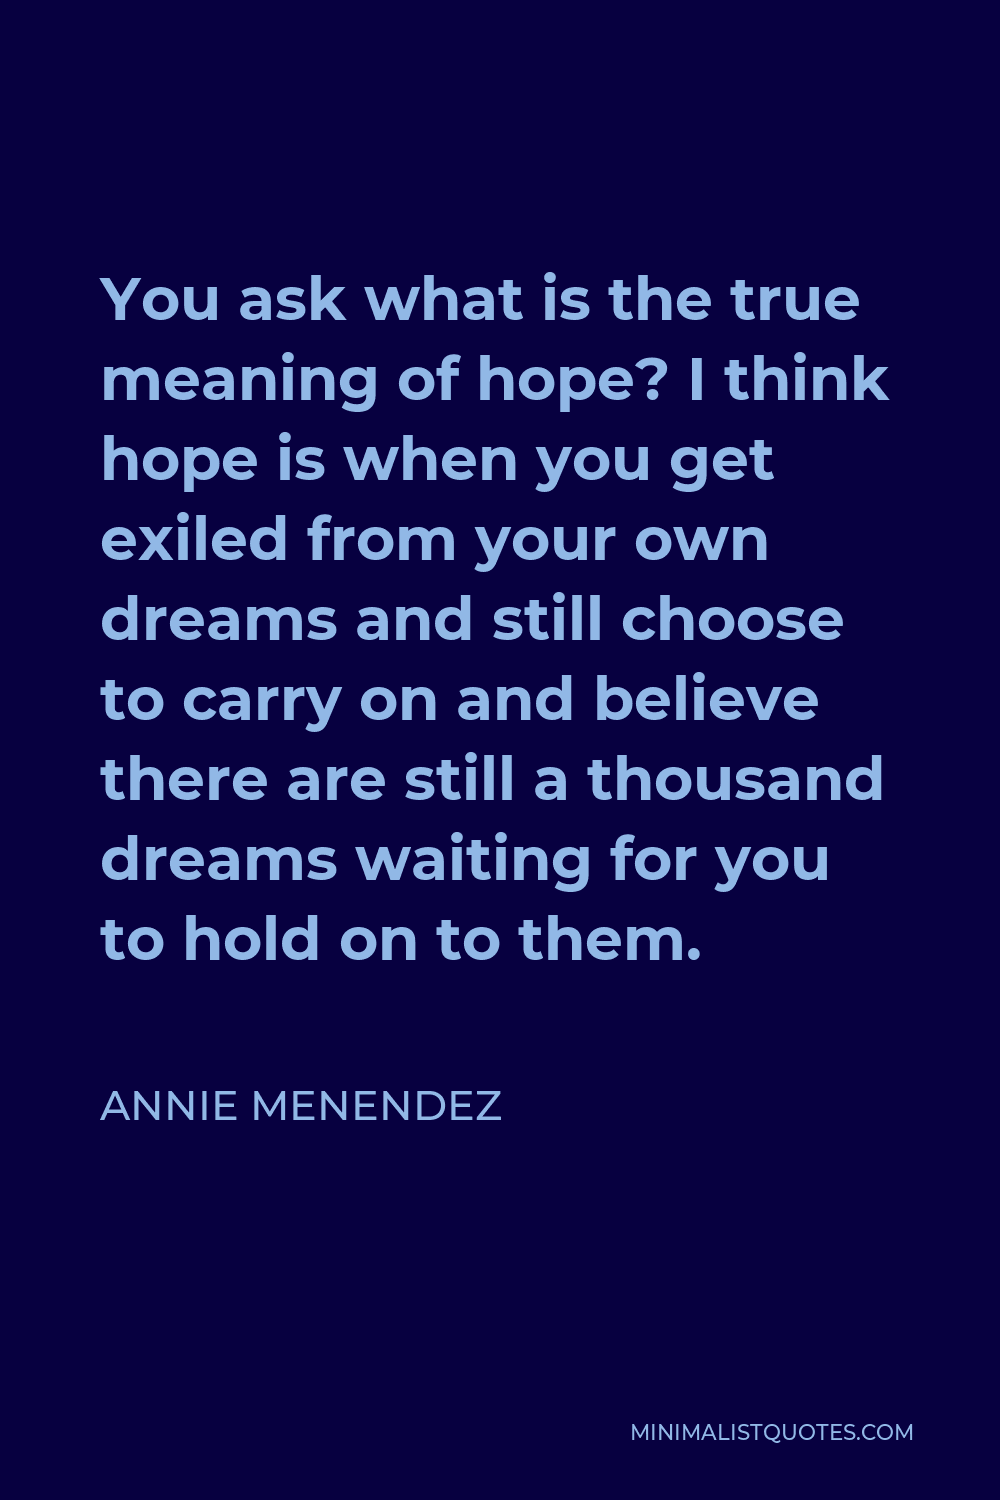 Annie Menendez Quote - You ask what is the true meaning of hope? I think hope is when you get exiled from your own dreams and still choose to carry on and believe there are still a thousand dreams waiting for you to hold on to them.